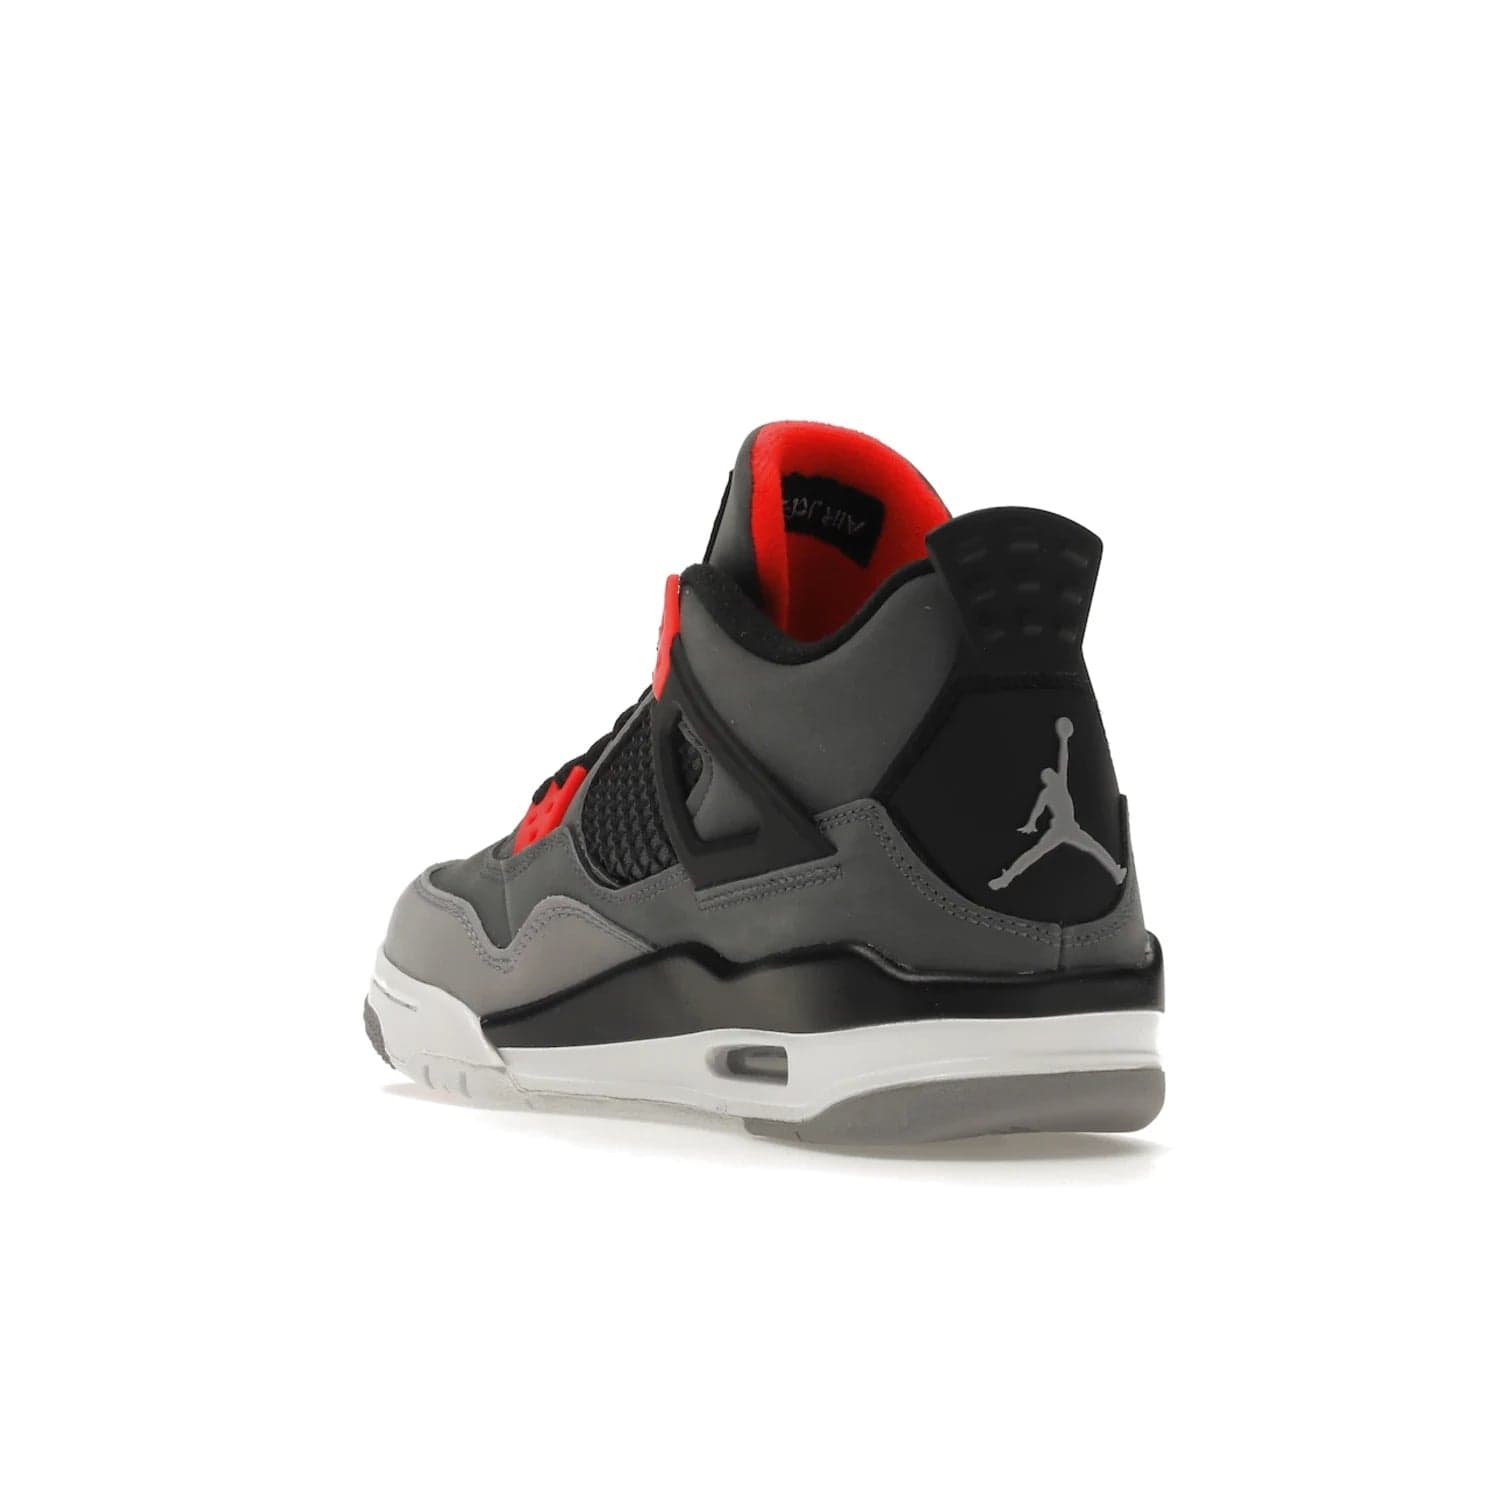 Jordan 4 Retro Infrared (GS) - Image 25 - Only at www.BallersClubKickz.com - Shop the Air Jordan 4 Retro Infrared (GS) for a classic silhouette with subtle yet bold features. Dark grey nubuck upper with lighter forefoot overlay, black accents, Infrared molded eyelets & woven tongue tag. Available June 2022.